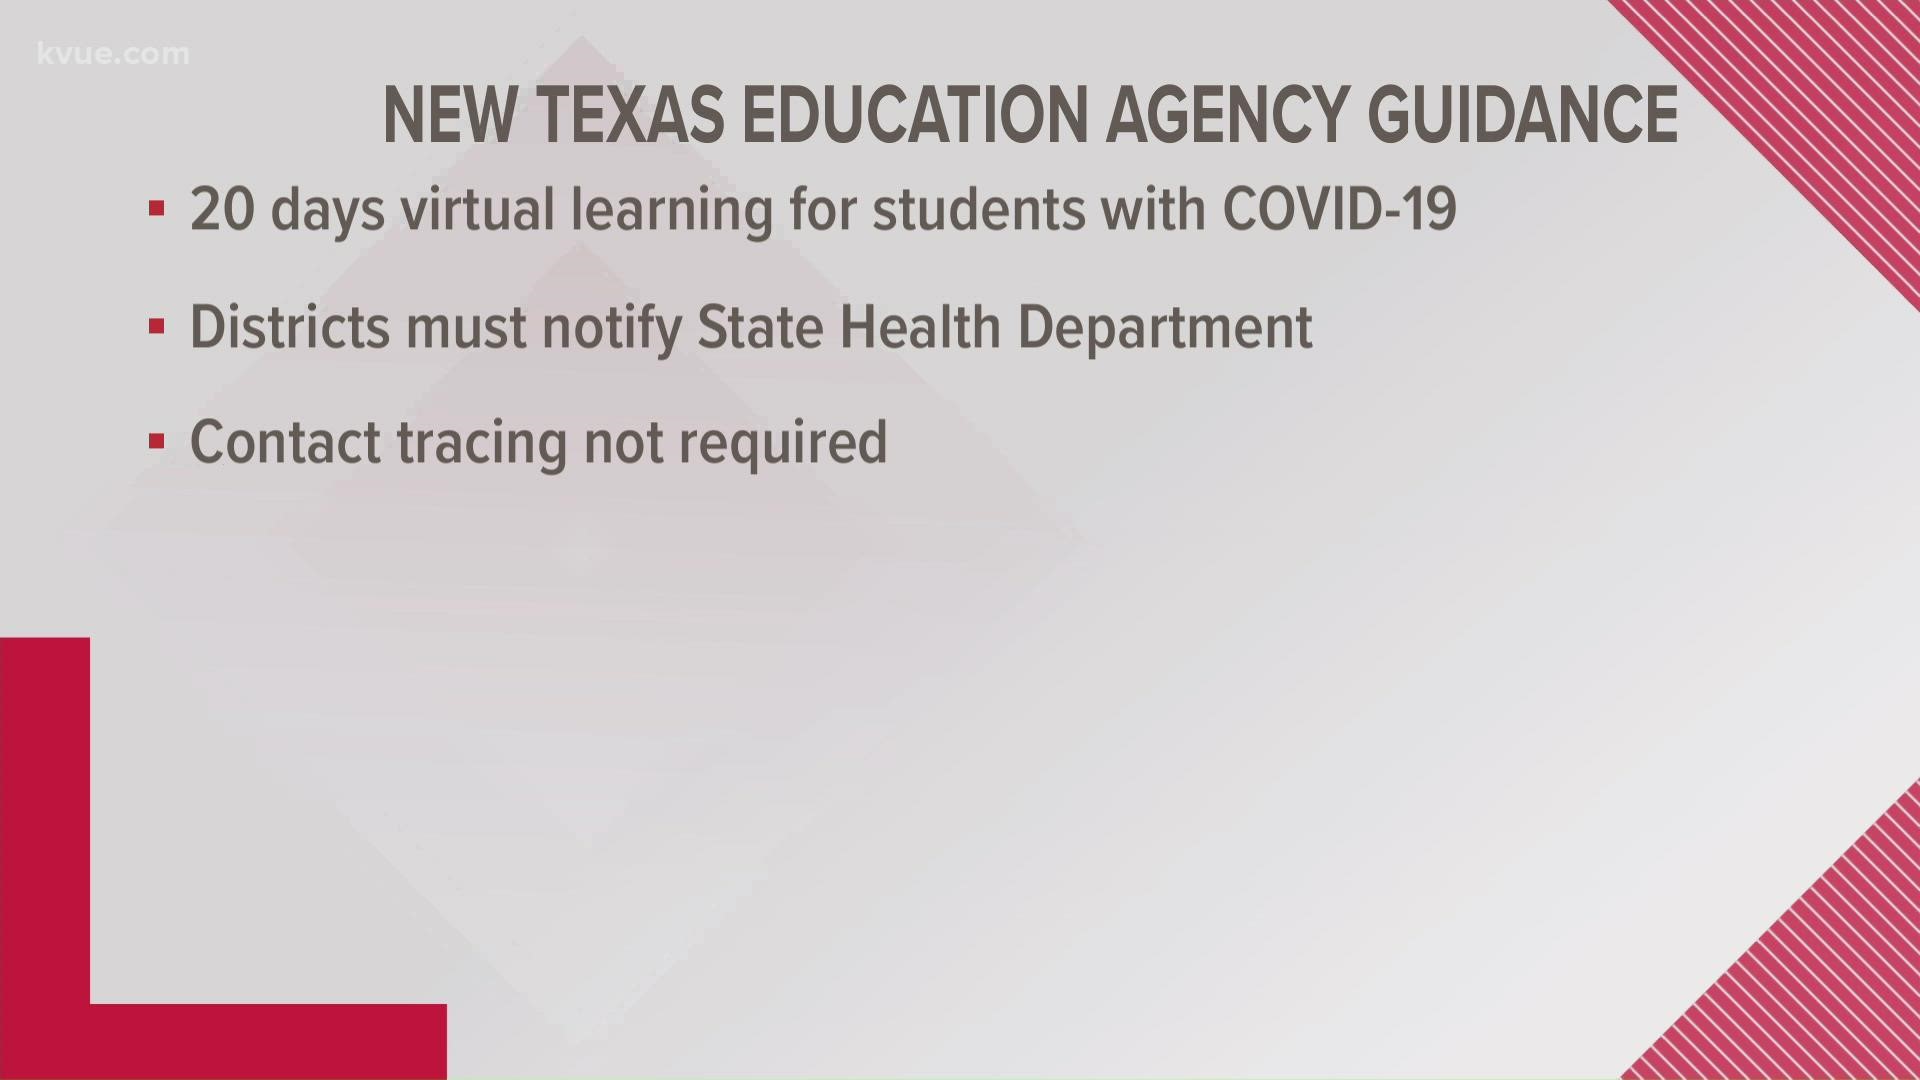 New TEA guidance includes giving students who contract COVID-19 20 days of virtual learning.